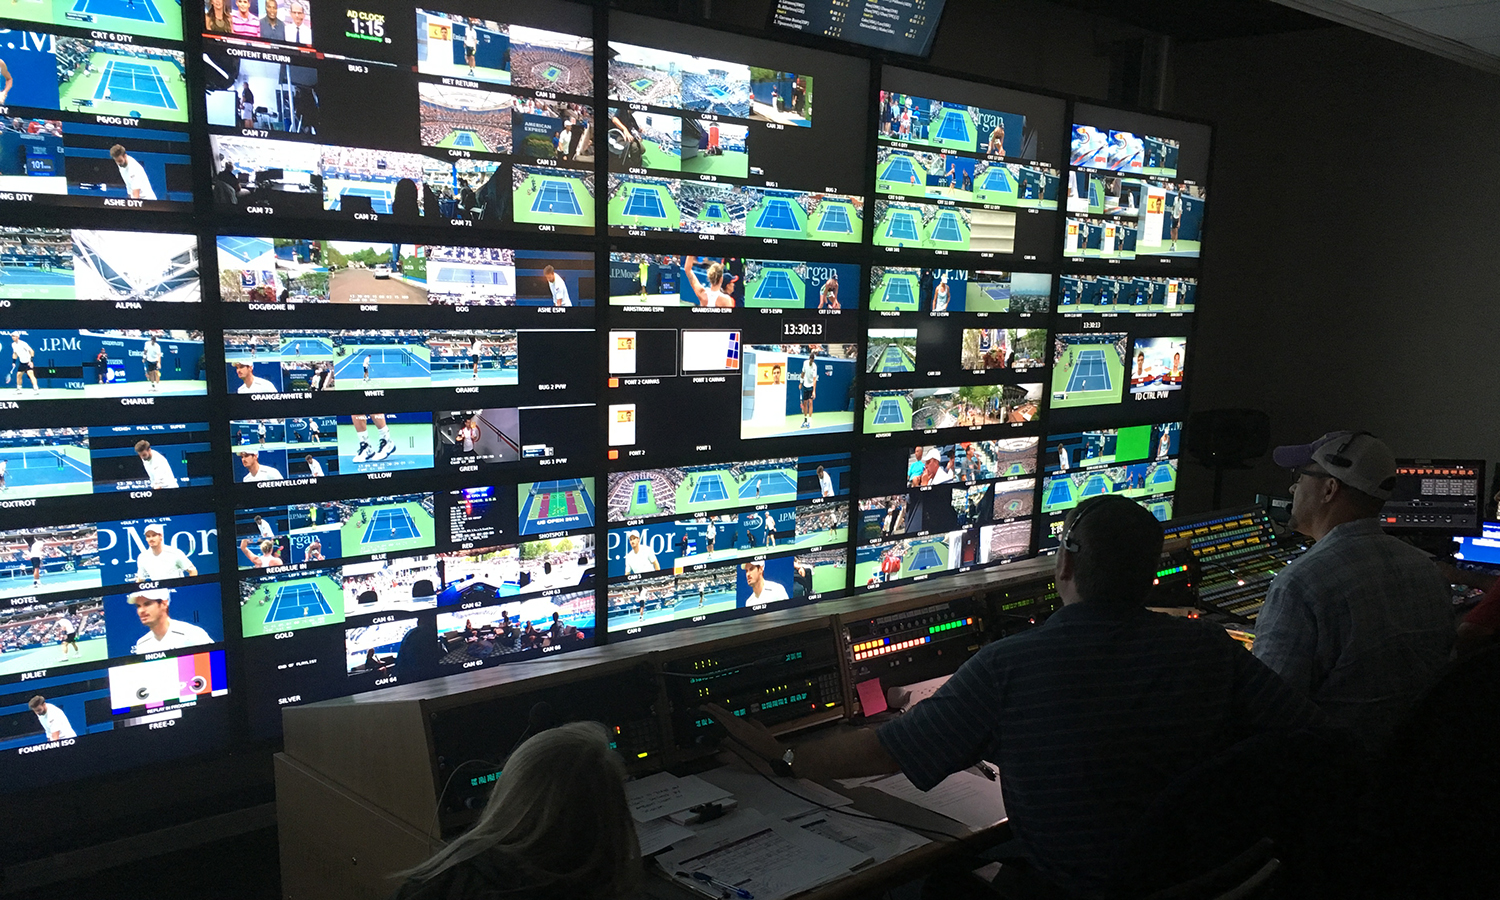 Live From the US Open In Year 2 of Rights Deal, ESPN Looks To Refine, Enhance Production Model